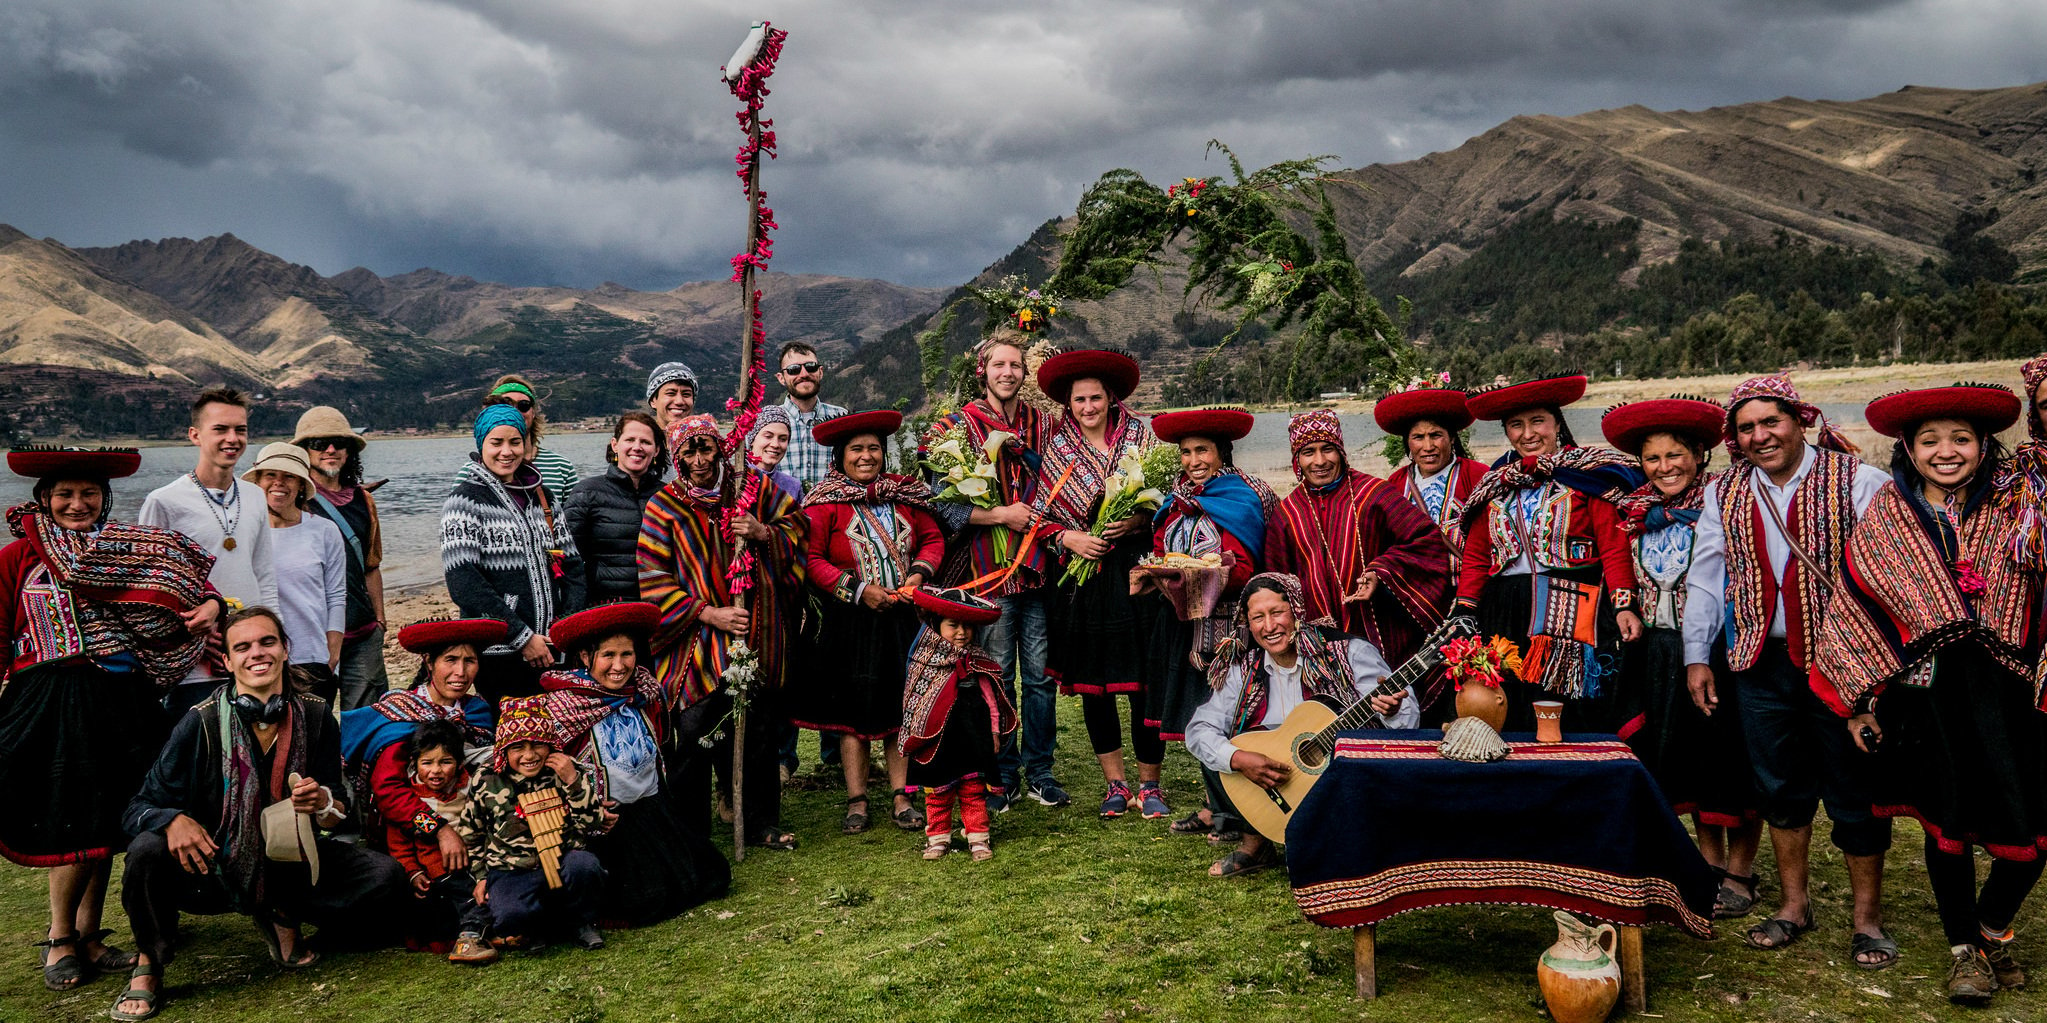 While taking part in gap year travel, GVI participants in Cusco take part in a traditional wedding.